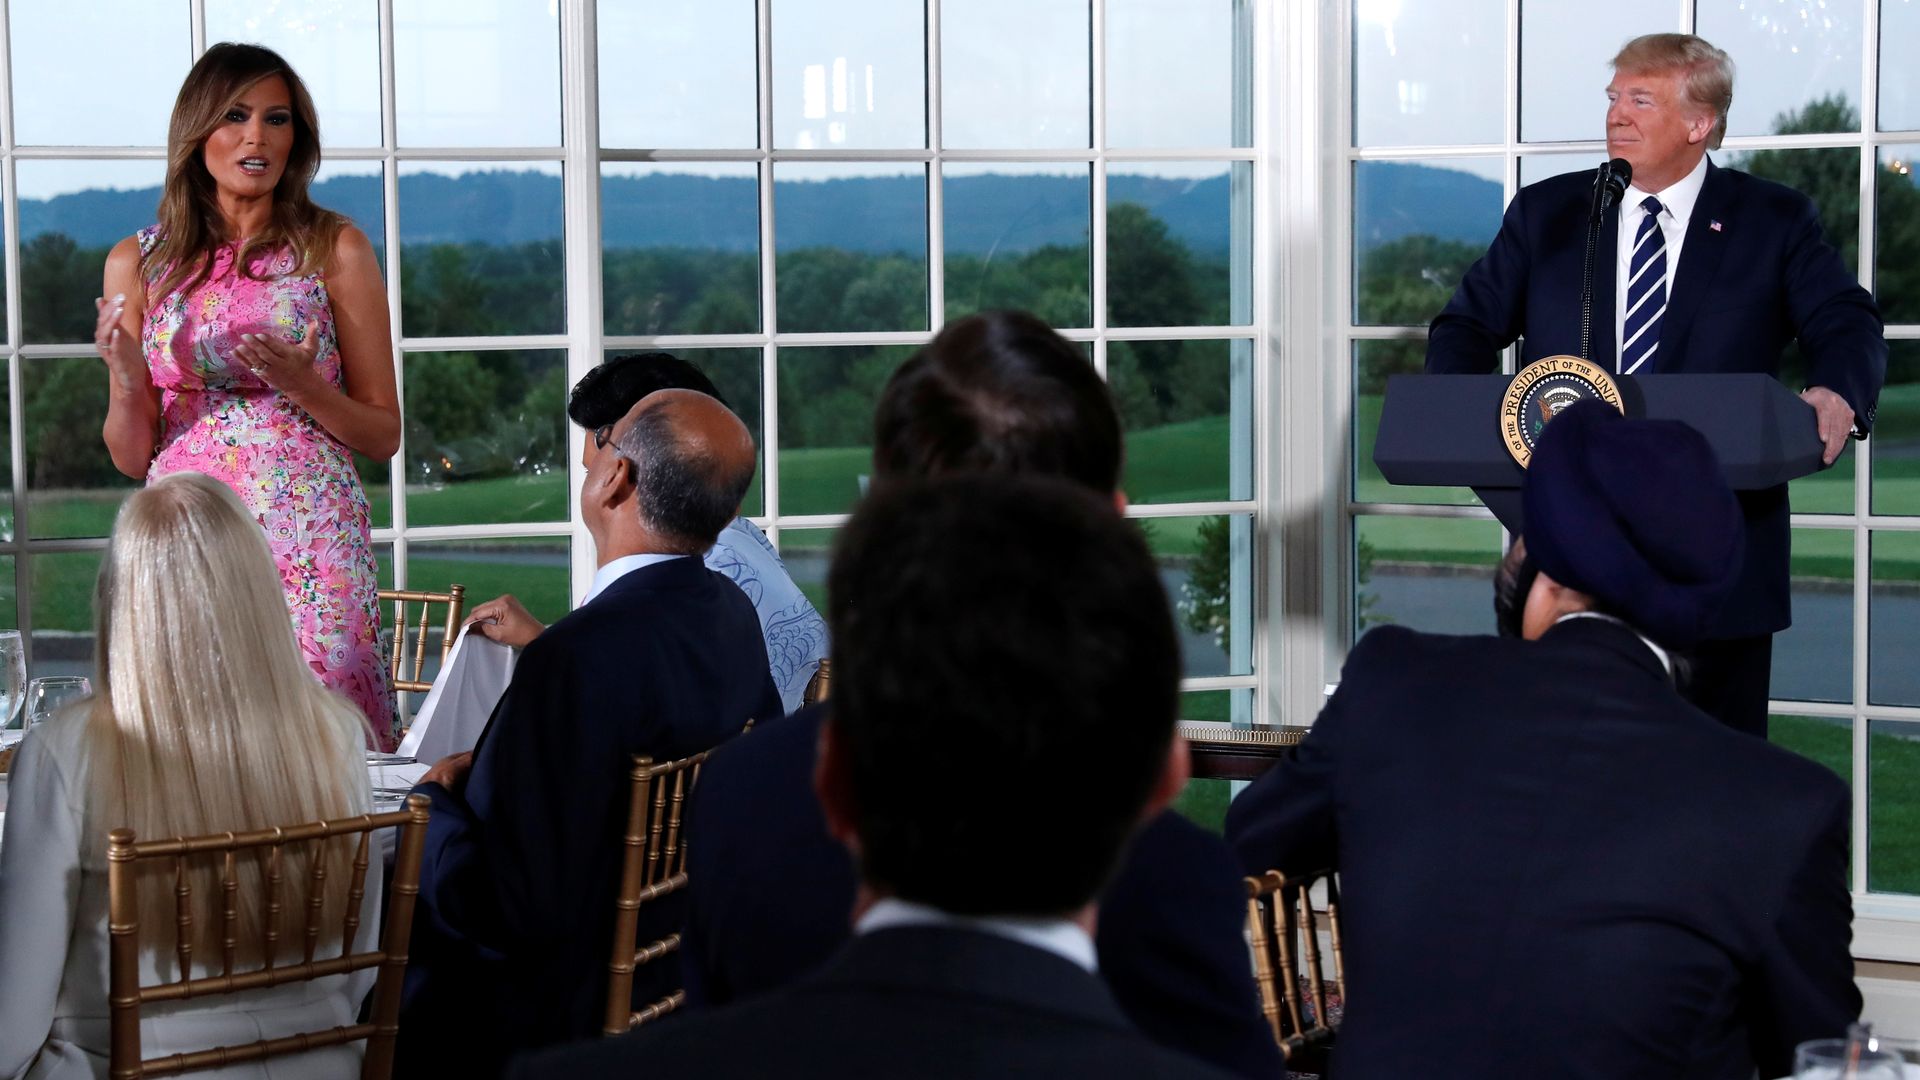 Donald Trump and Melania Trump are pictured here speaking in front of seated guests at a dinner, with several windows facing a golf course behind them.